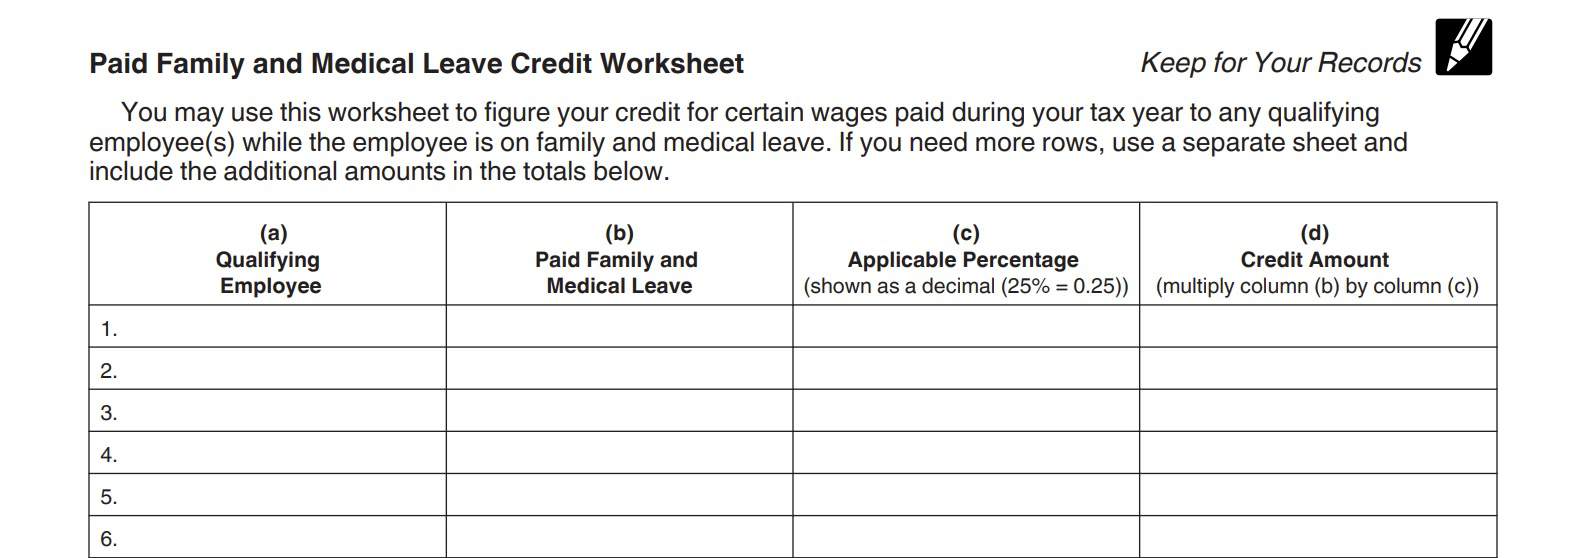 paid family and medical leave credit worksheet